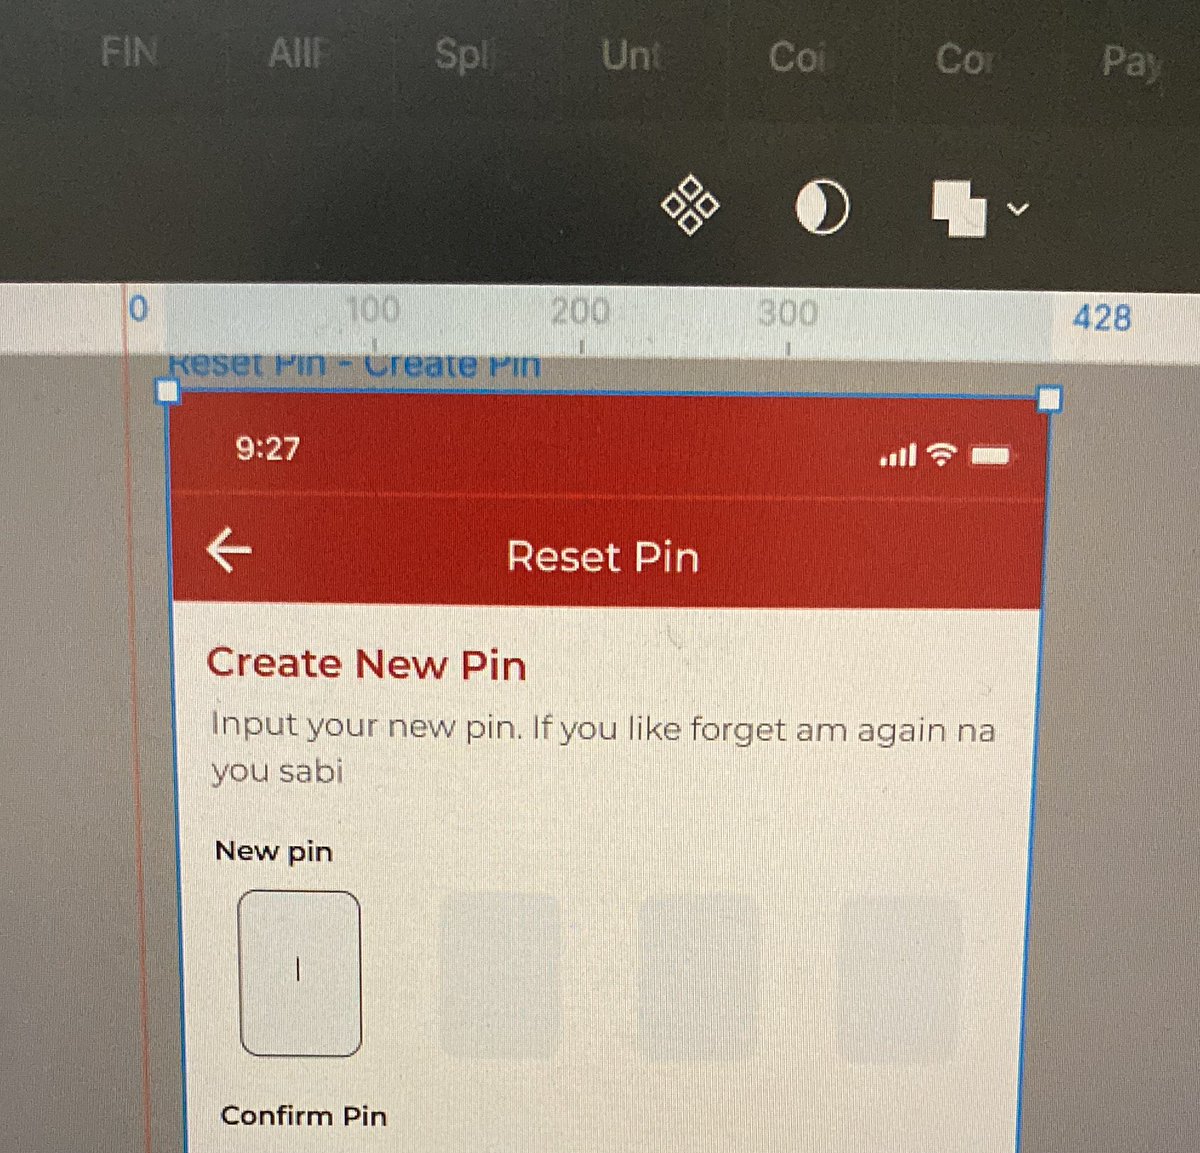 Designing a reset pin screen. 

What do you’ll think about my UX writing skill?